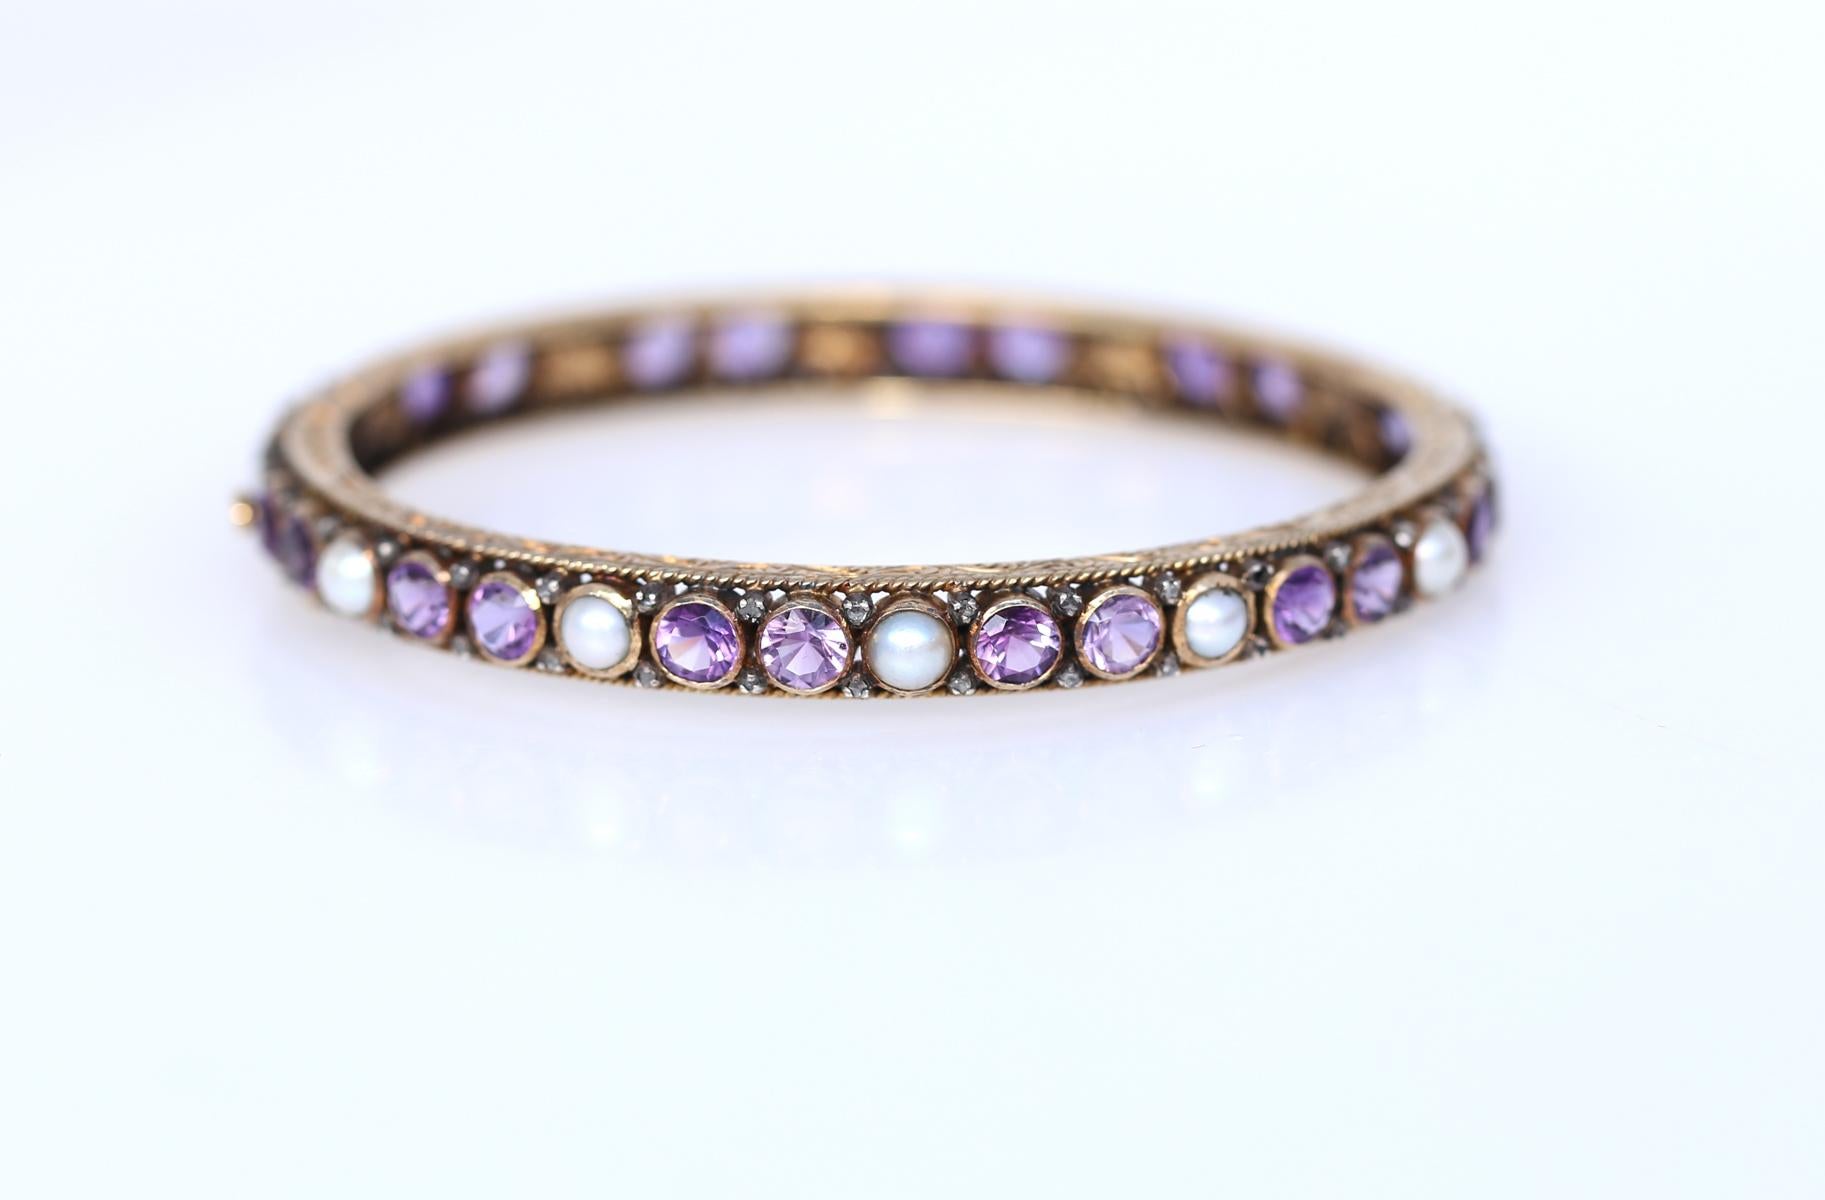 A Victorian Amethyst and Pearl bangle bracelet in yellow gold, the hinged body set with a row of round cut amethysts and pearls. Austrian assay marks. An absolutely wonderful item and a great example of its time. The design is so well judged and